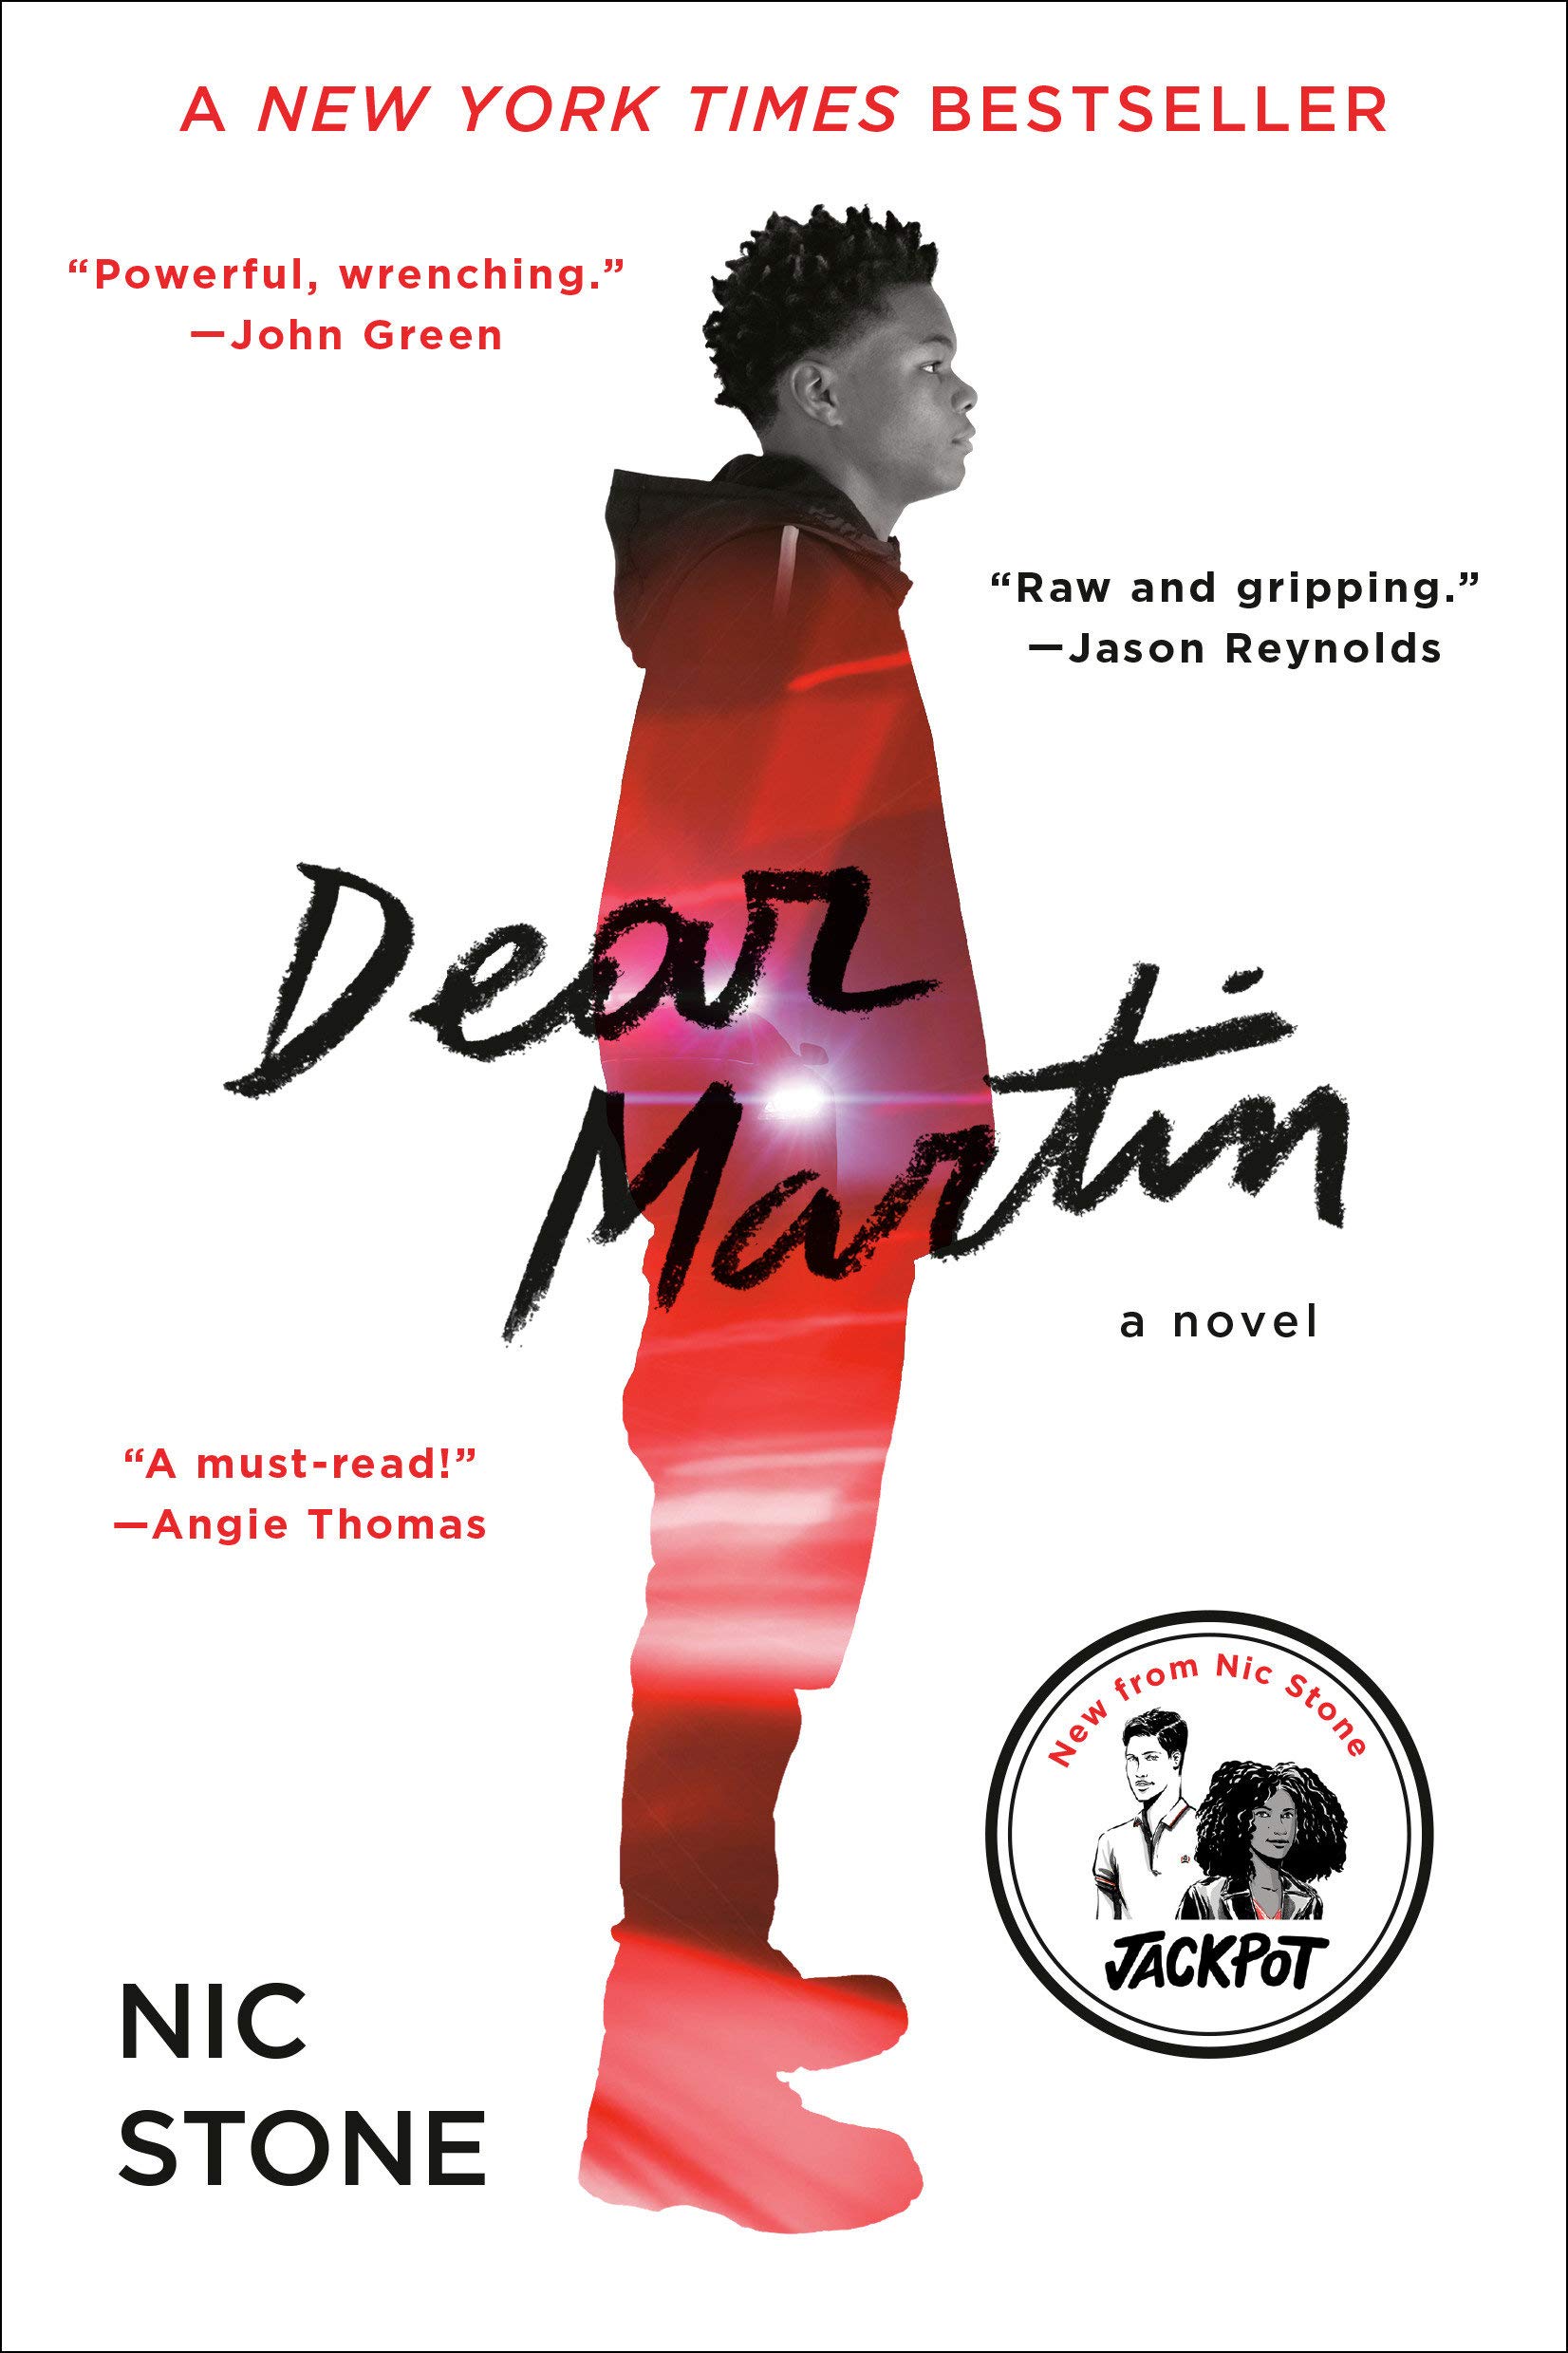 White background with a Black teen's profile. The title of the book and the author's name are also present in black letters.